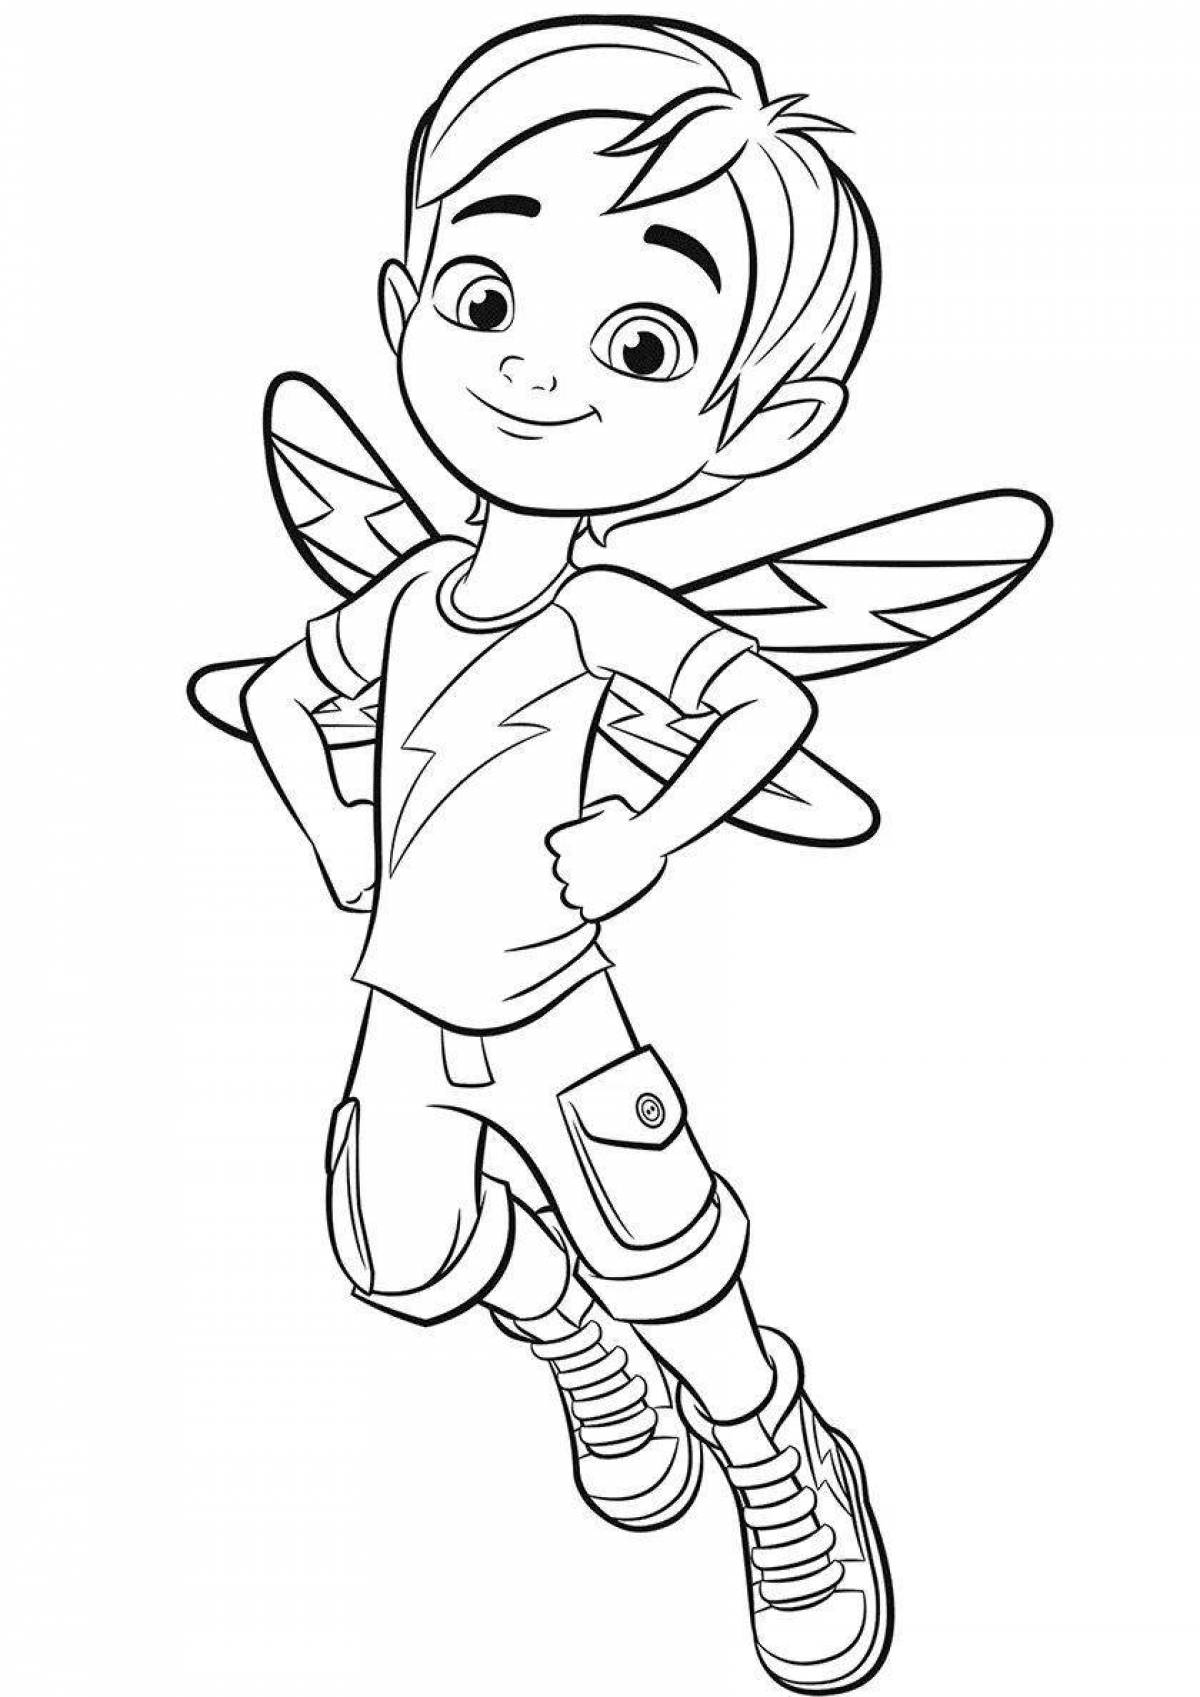 Adorable fairy coloring book for kids